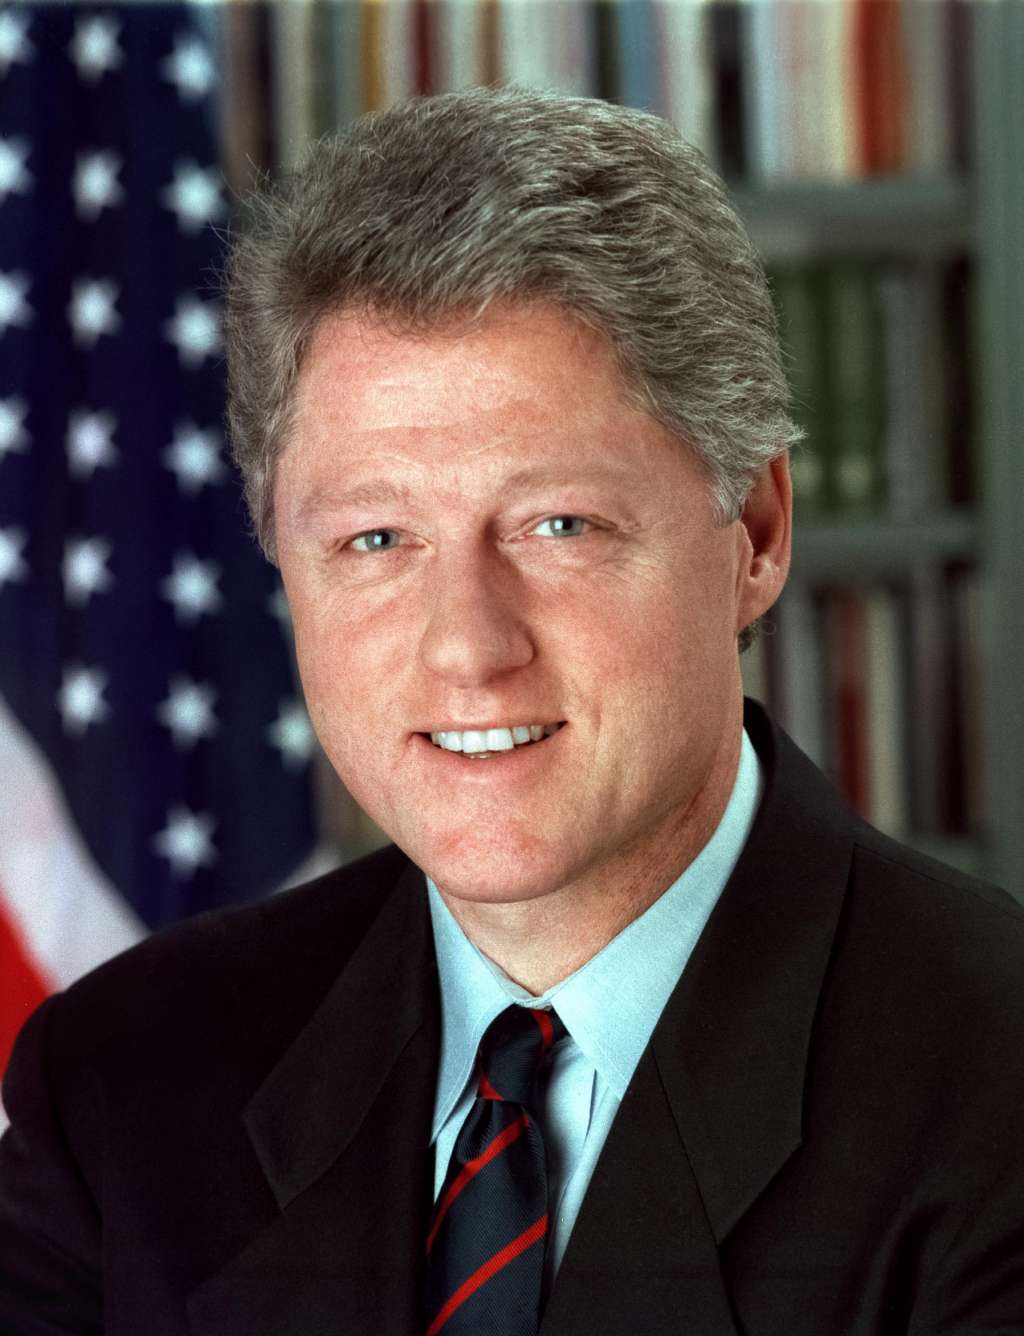 Bill Clinton  Raised by his grandparents after the death of his father adopted the name of his stepfather